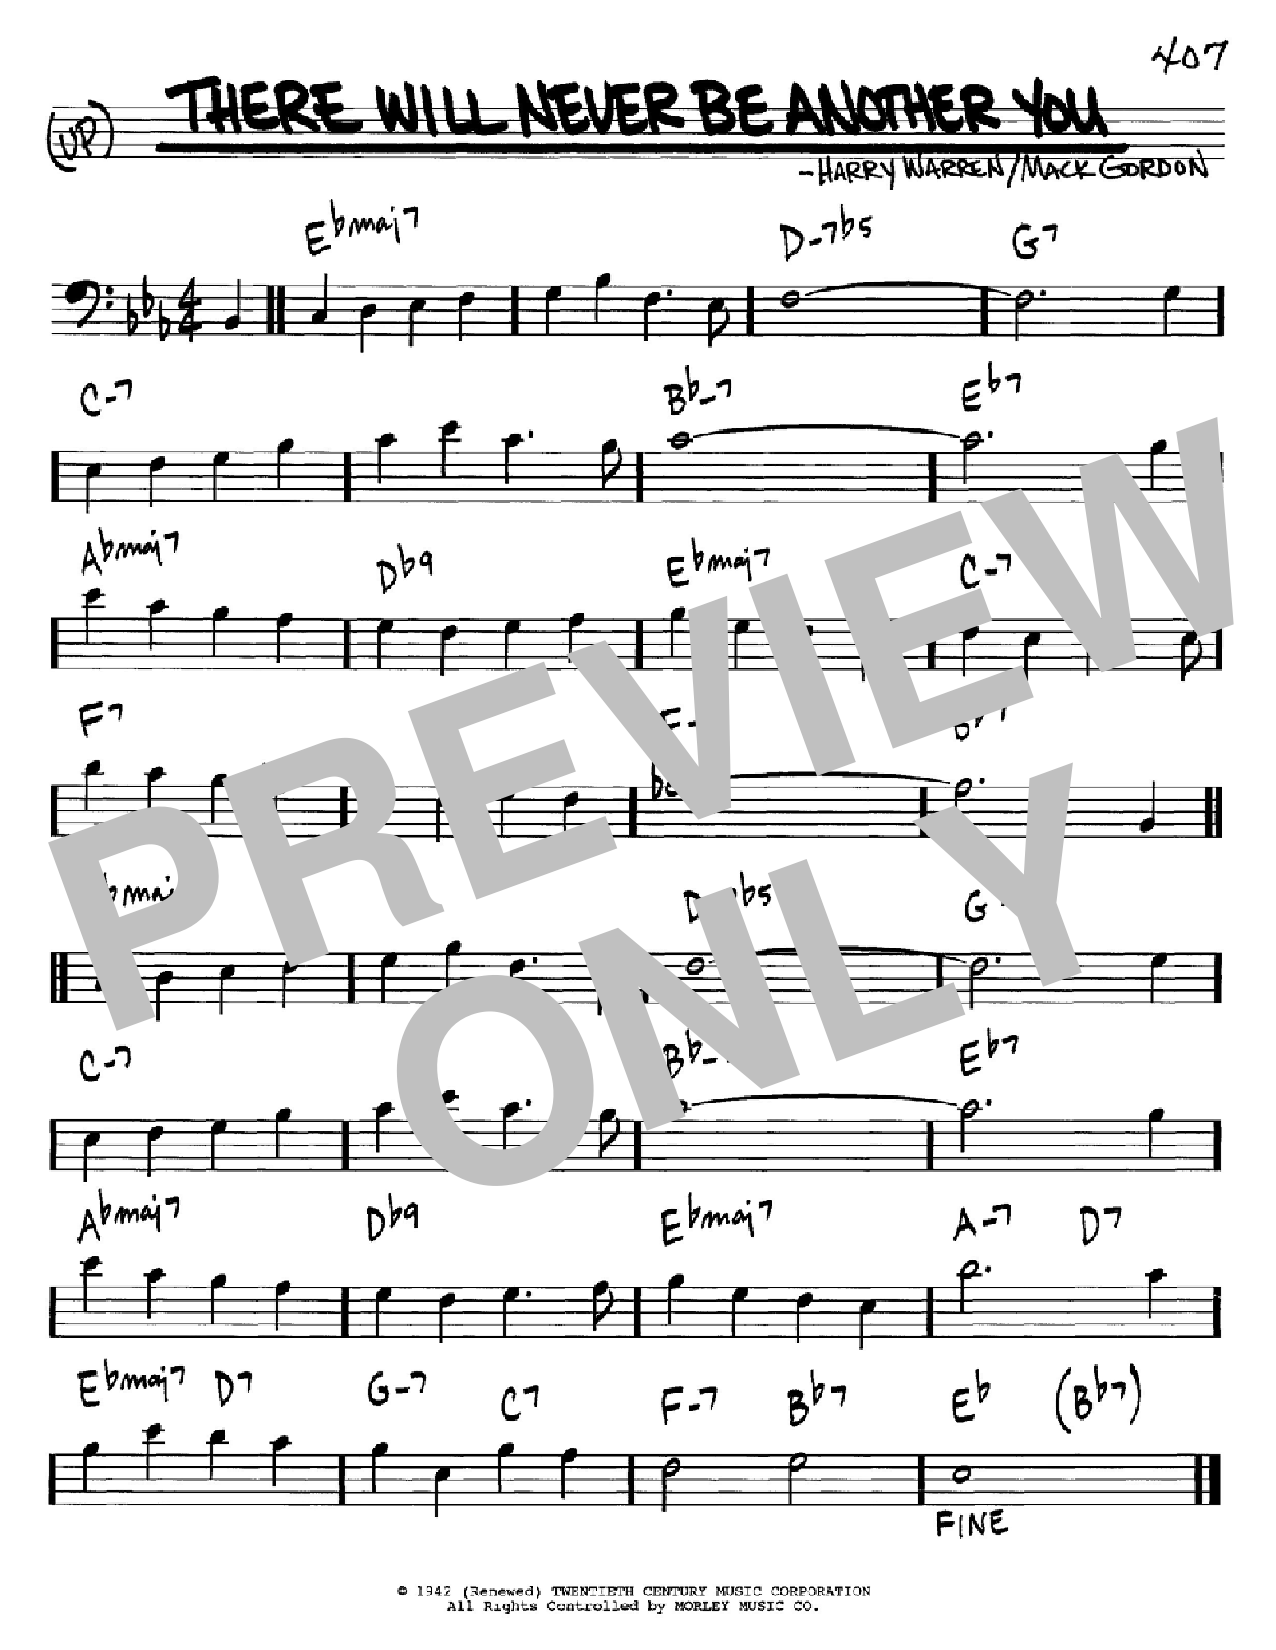 Download Mack Gordon There Will Never Be Another You Sheet Music